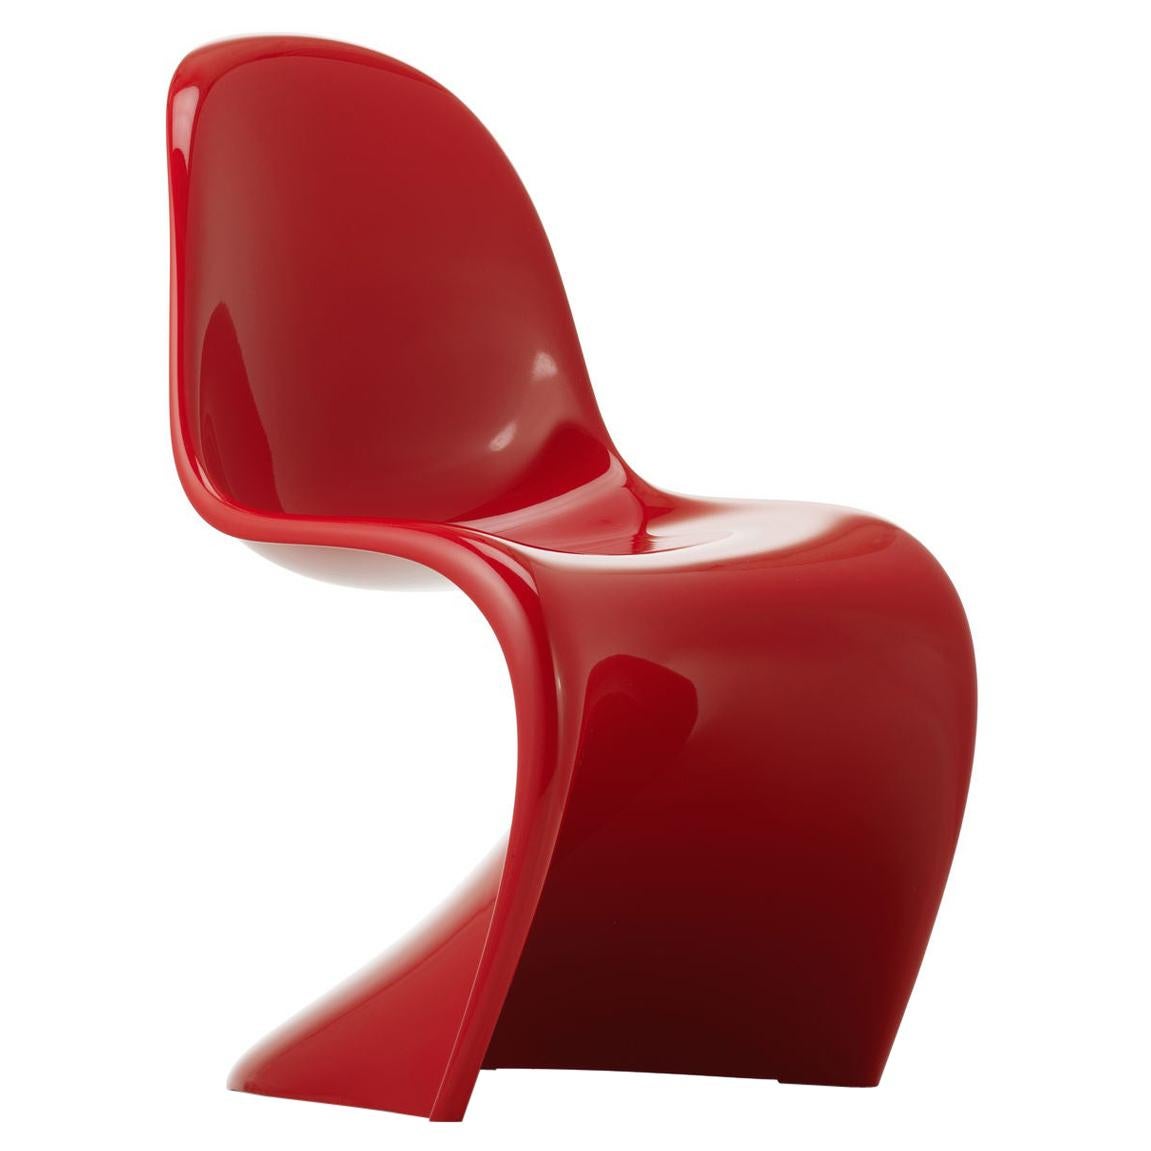 Panton Chair Classic Designed by Verner Panton and Manufactured by Vitra